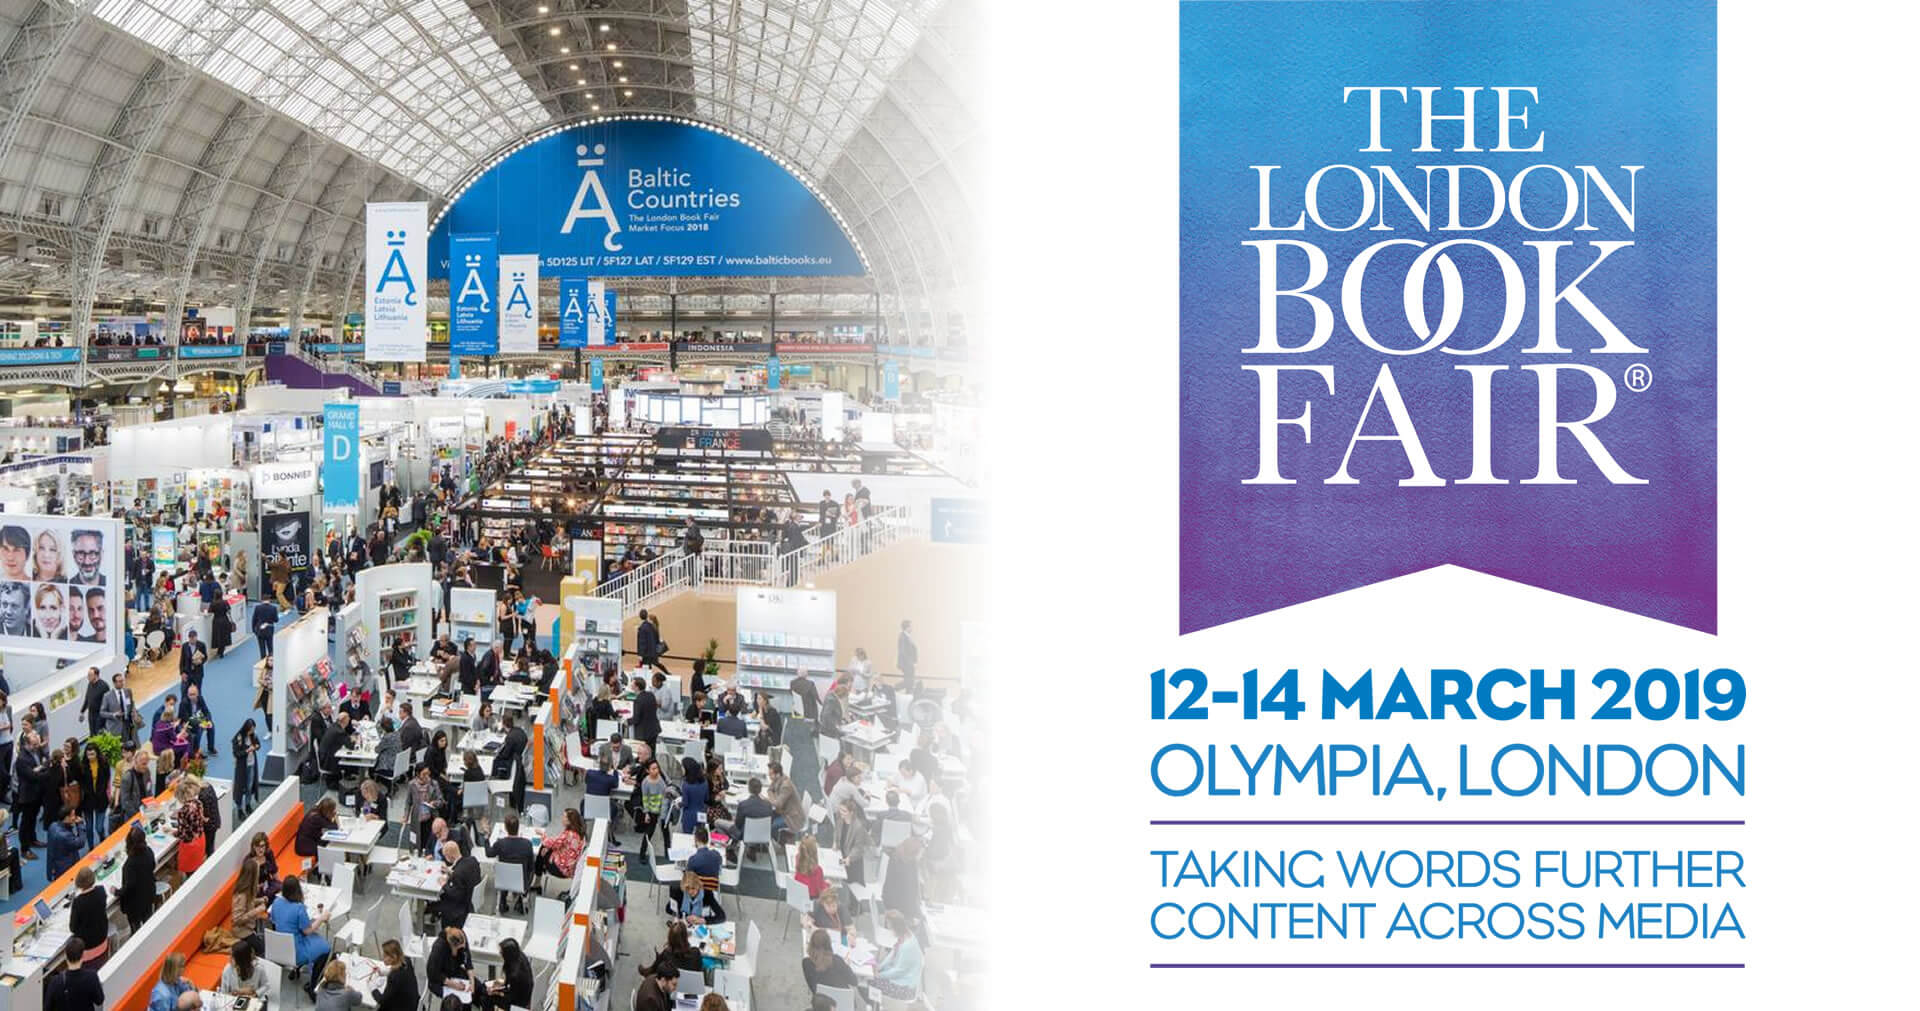 Arole Cultural | Arole Cultural, publishing house specialized in African-Brazilian religious titles, participates in the London Book Fair on 12-14 March.